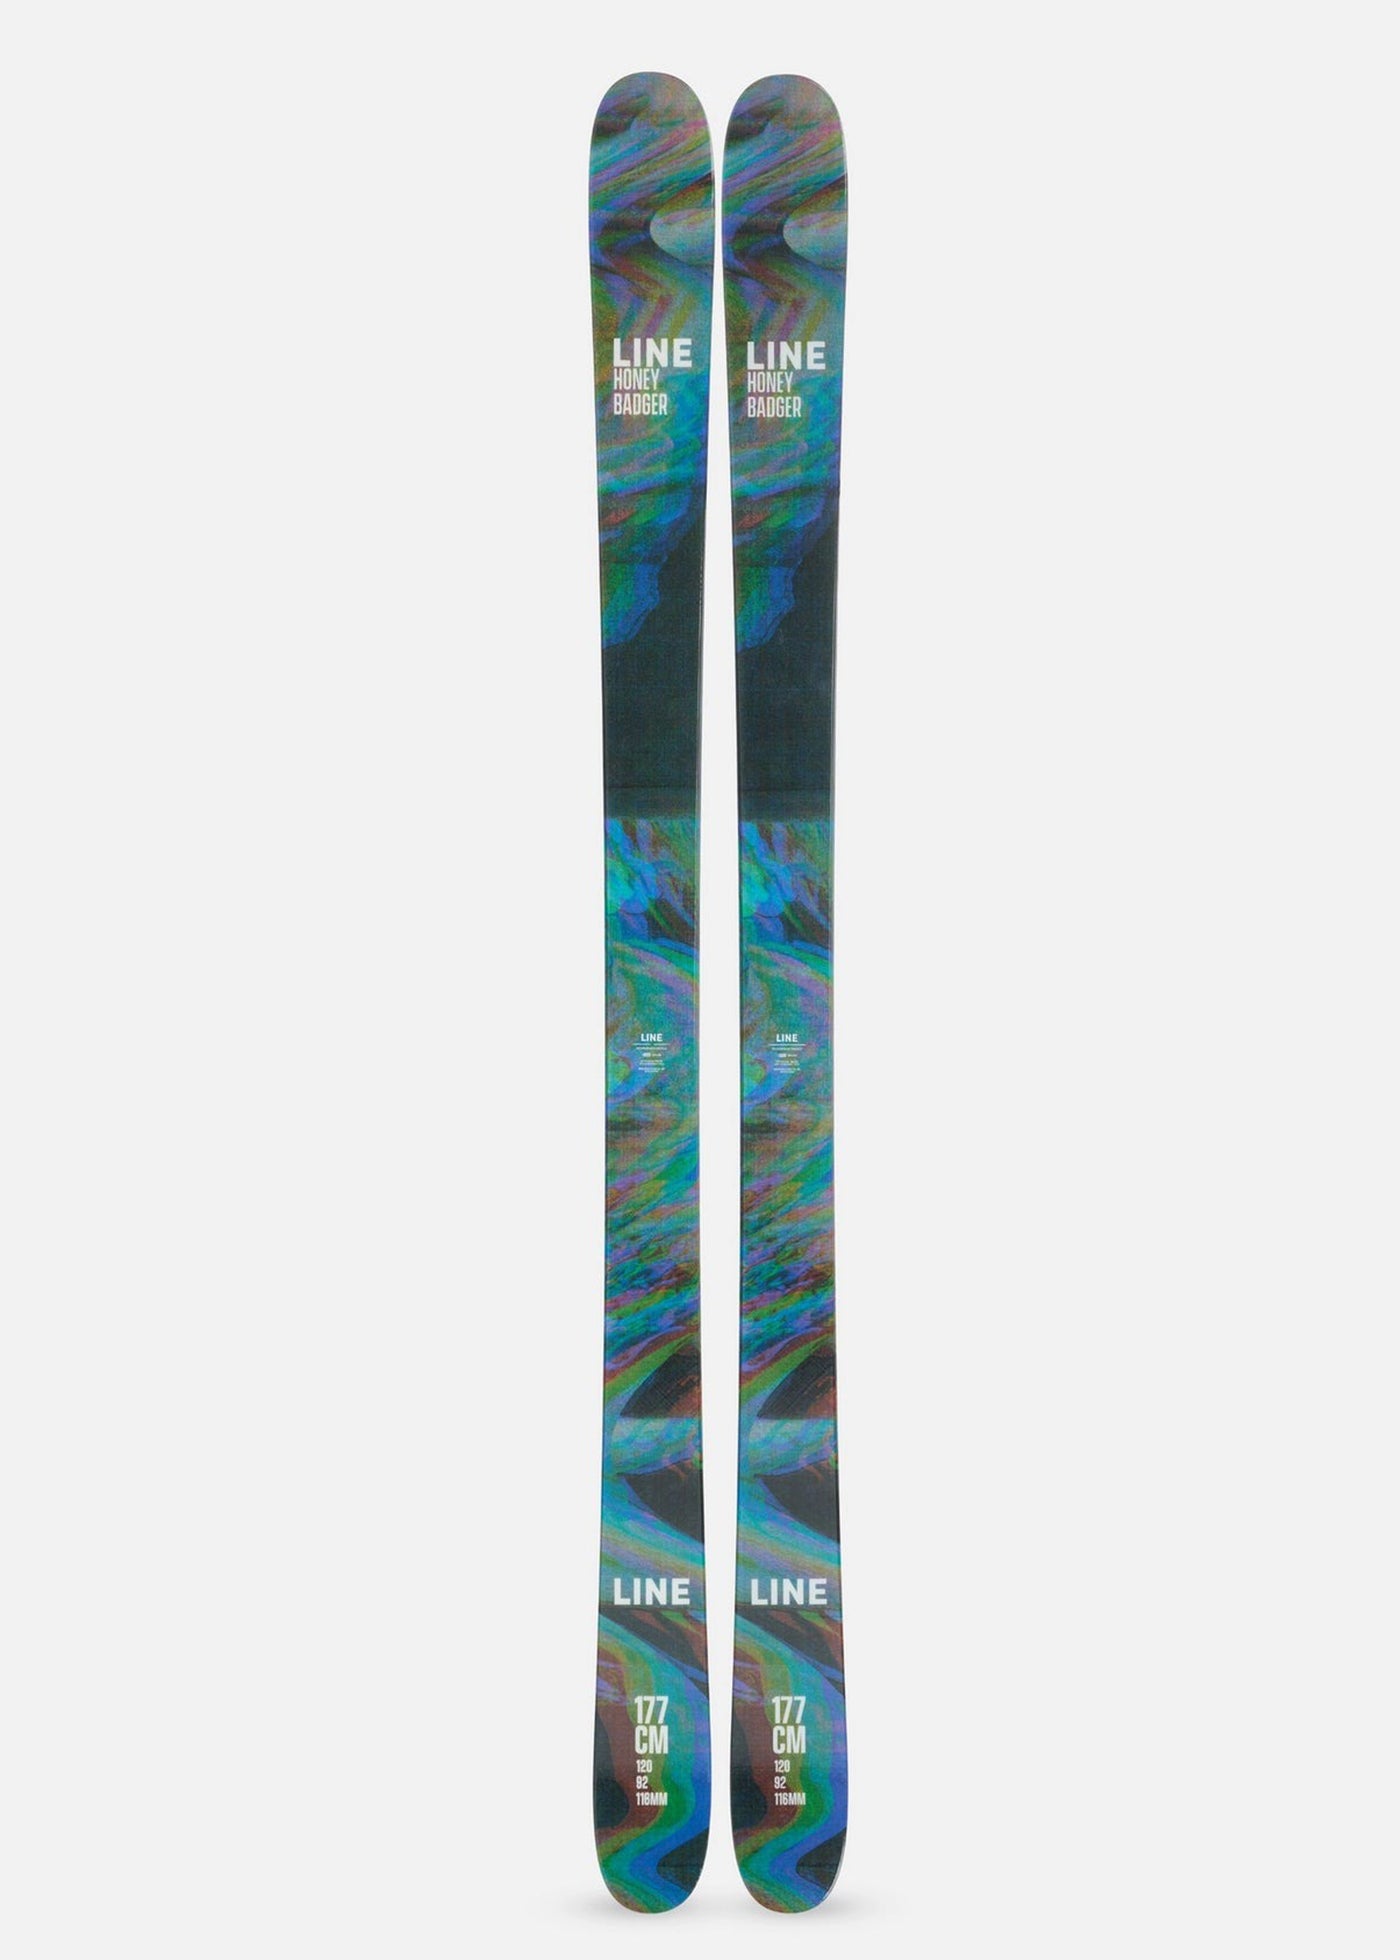 LINE Skis HONEY BADGER 2024 Includes Marker Squire 11 Bindings